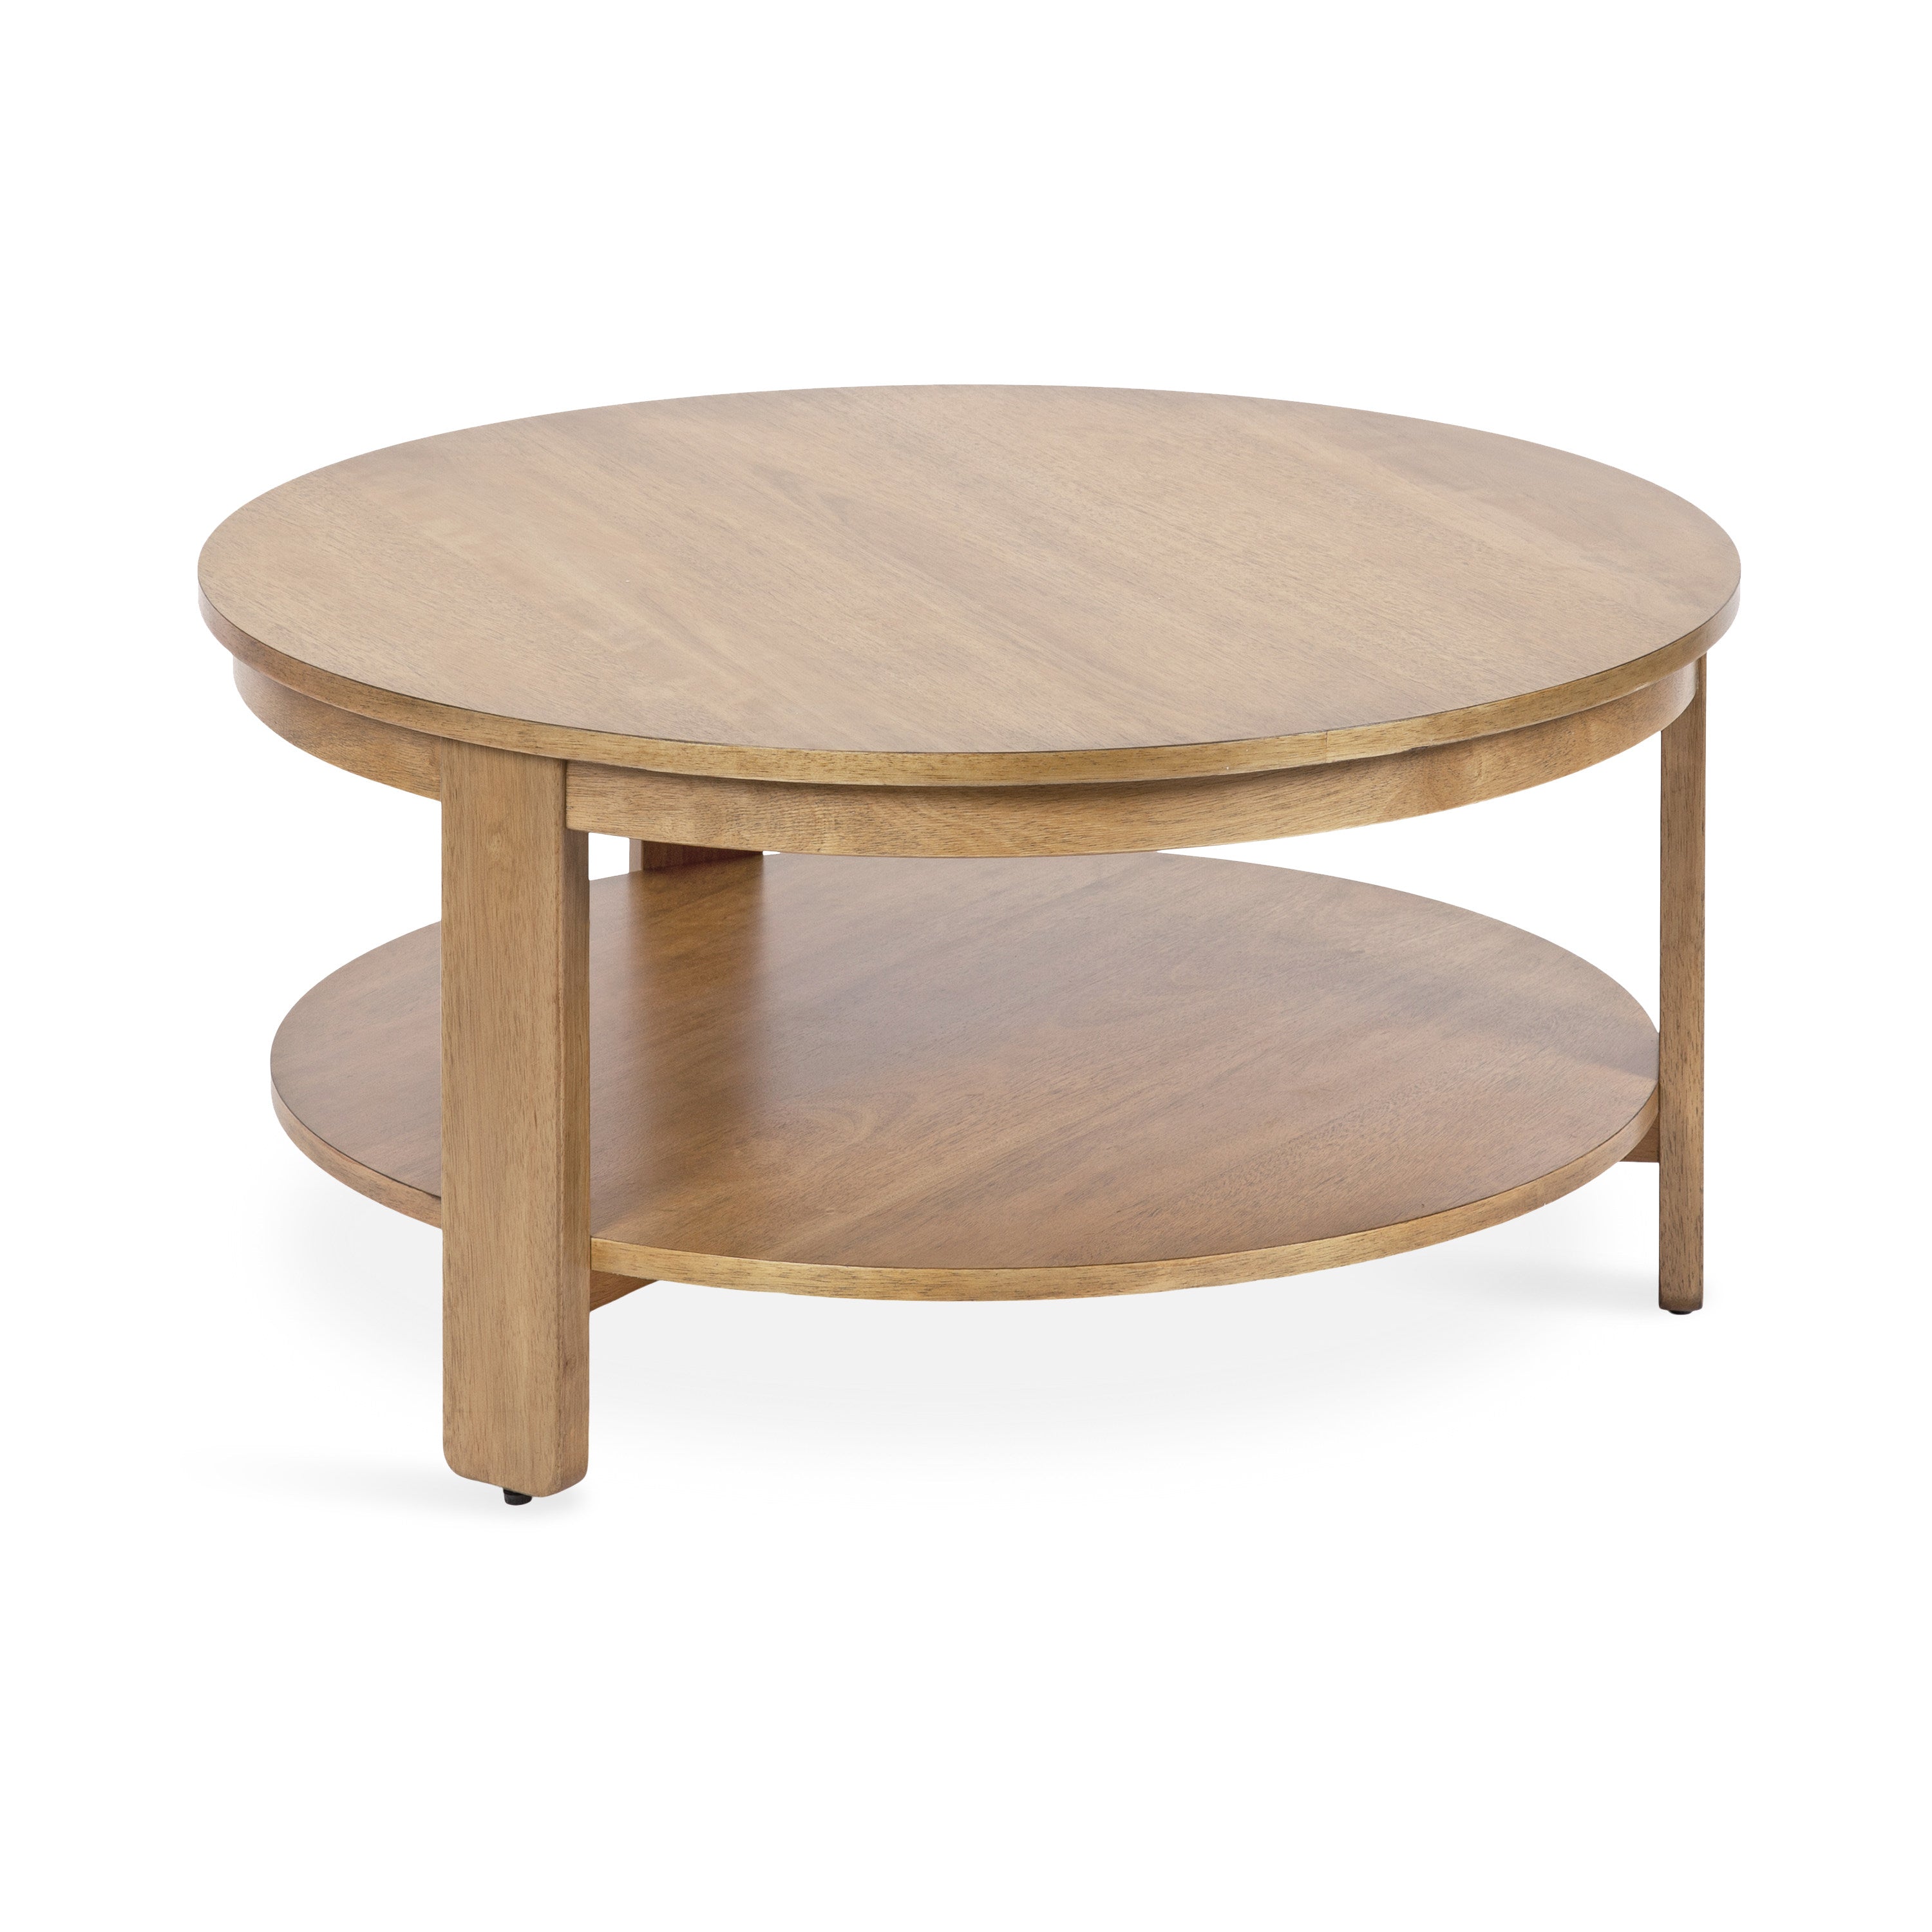 Foxford Round Wood Coffee Table